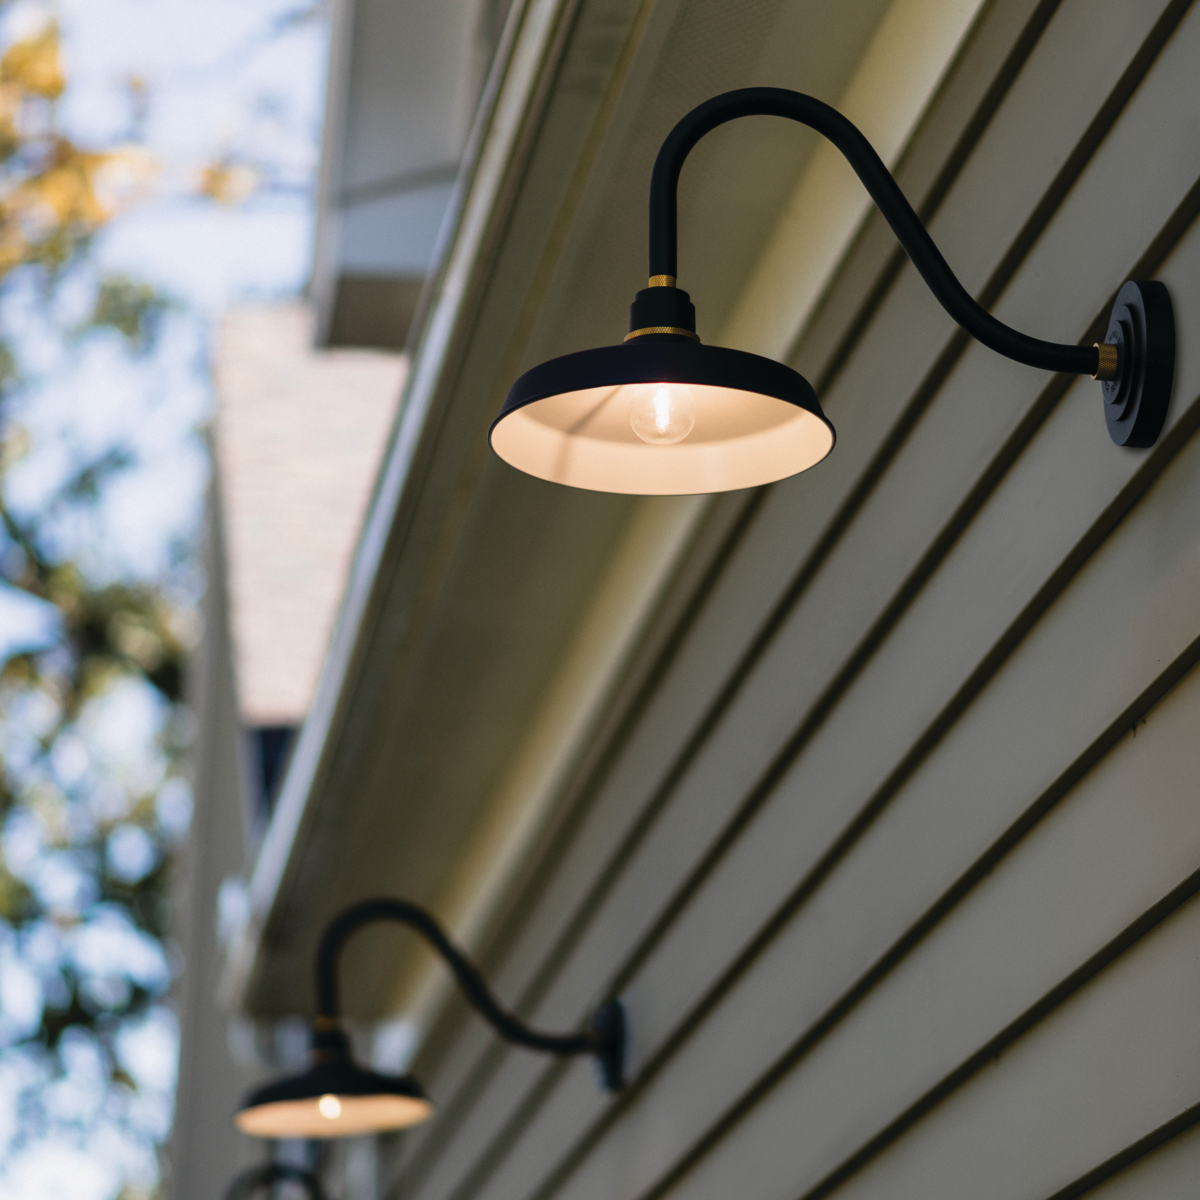 An outdoor wall sconce providing light and security.